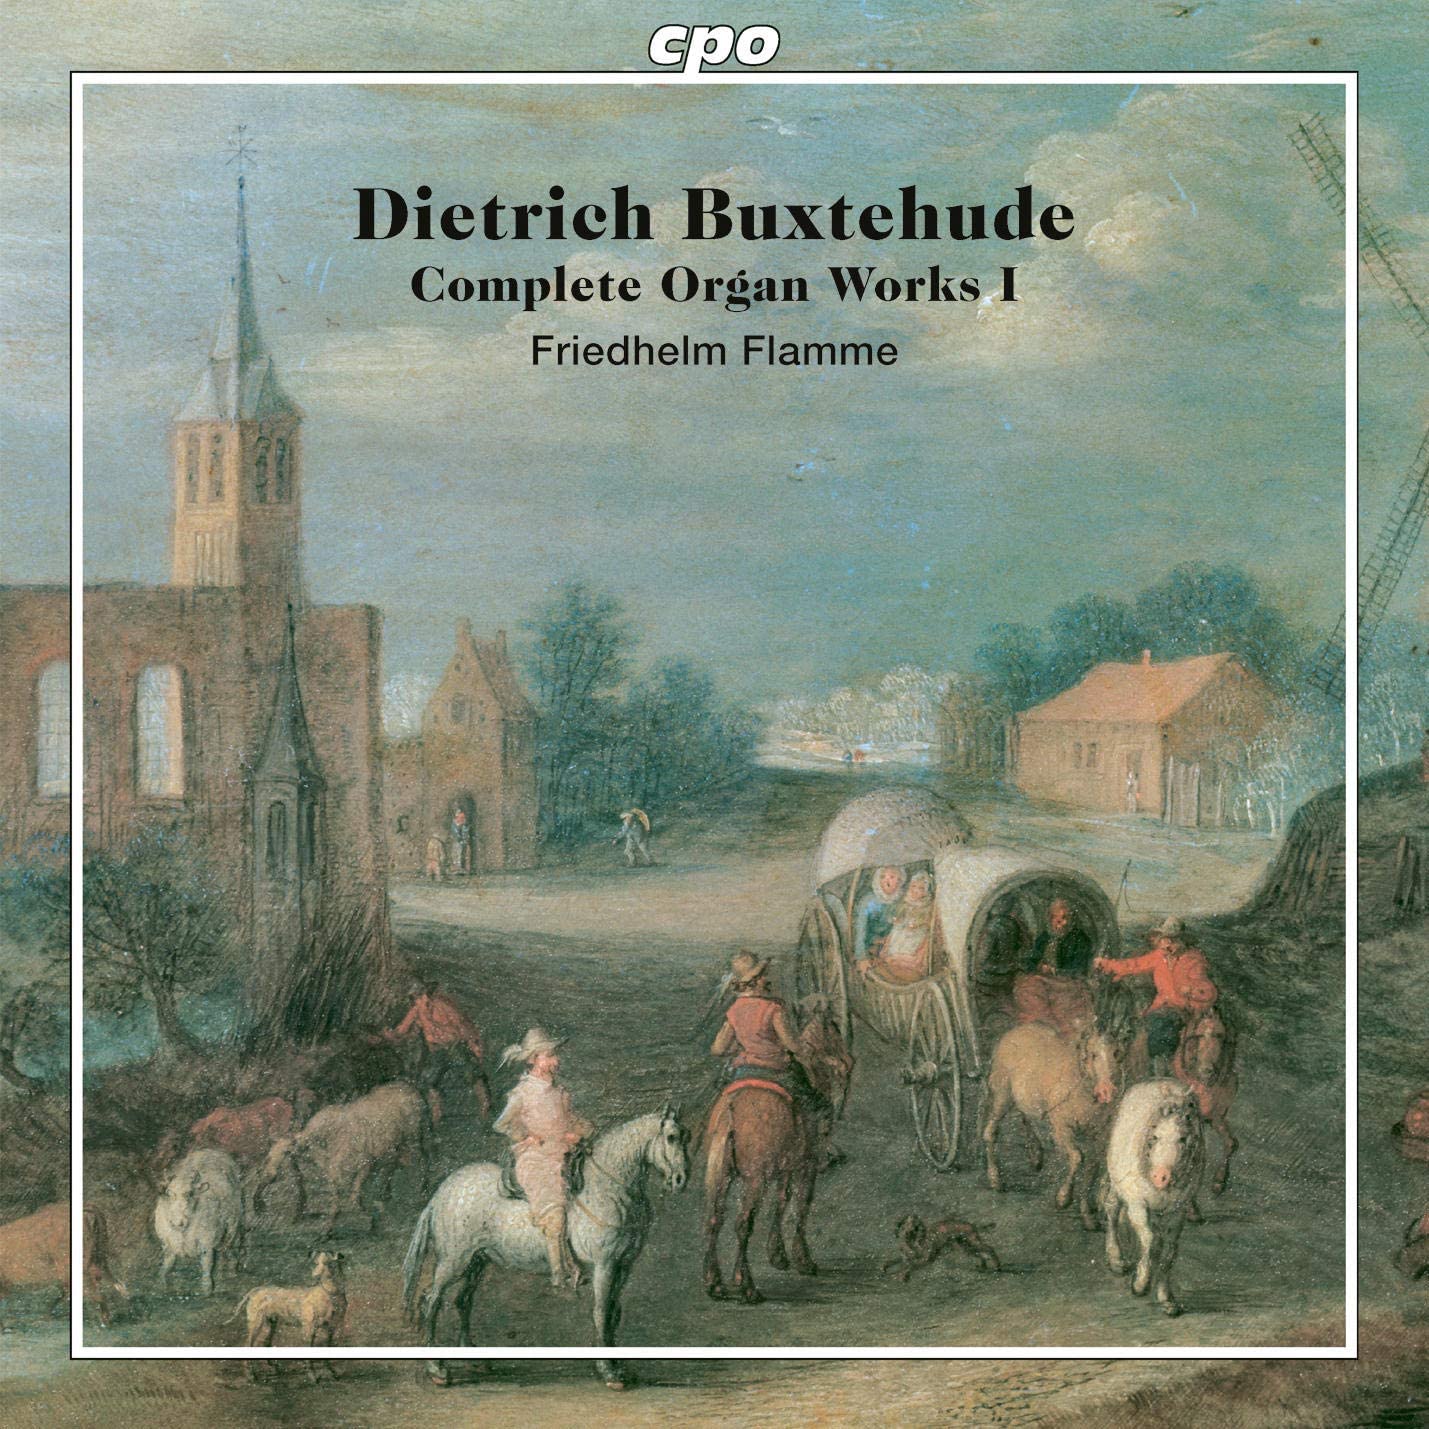 CD cover of Buxtehude Complete Organ Works I Friedhelm Flamme